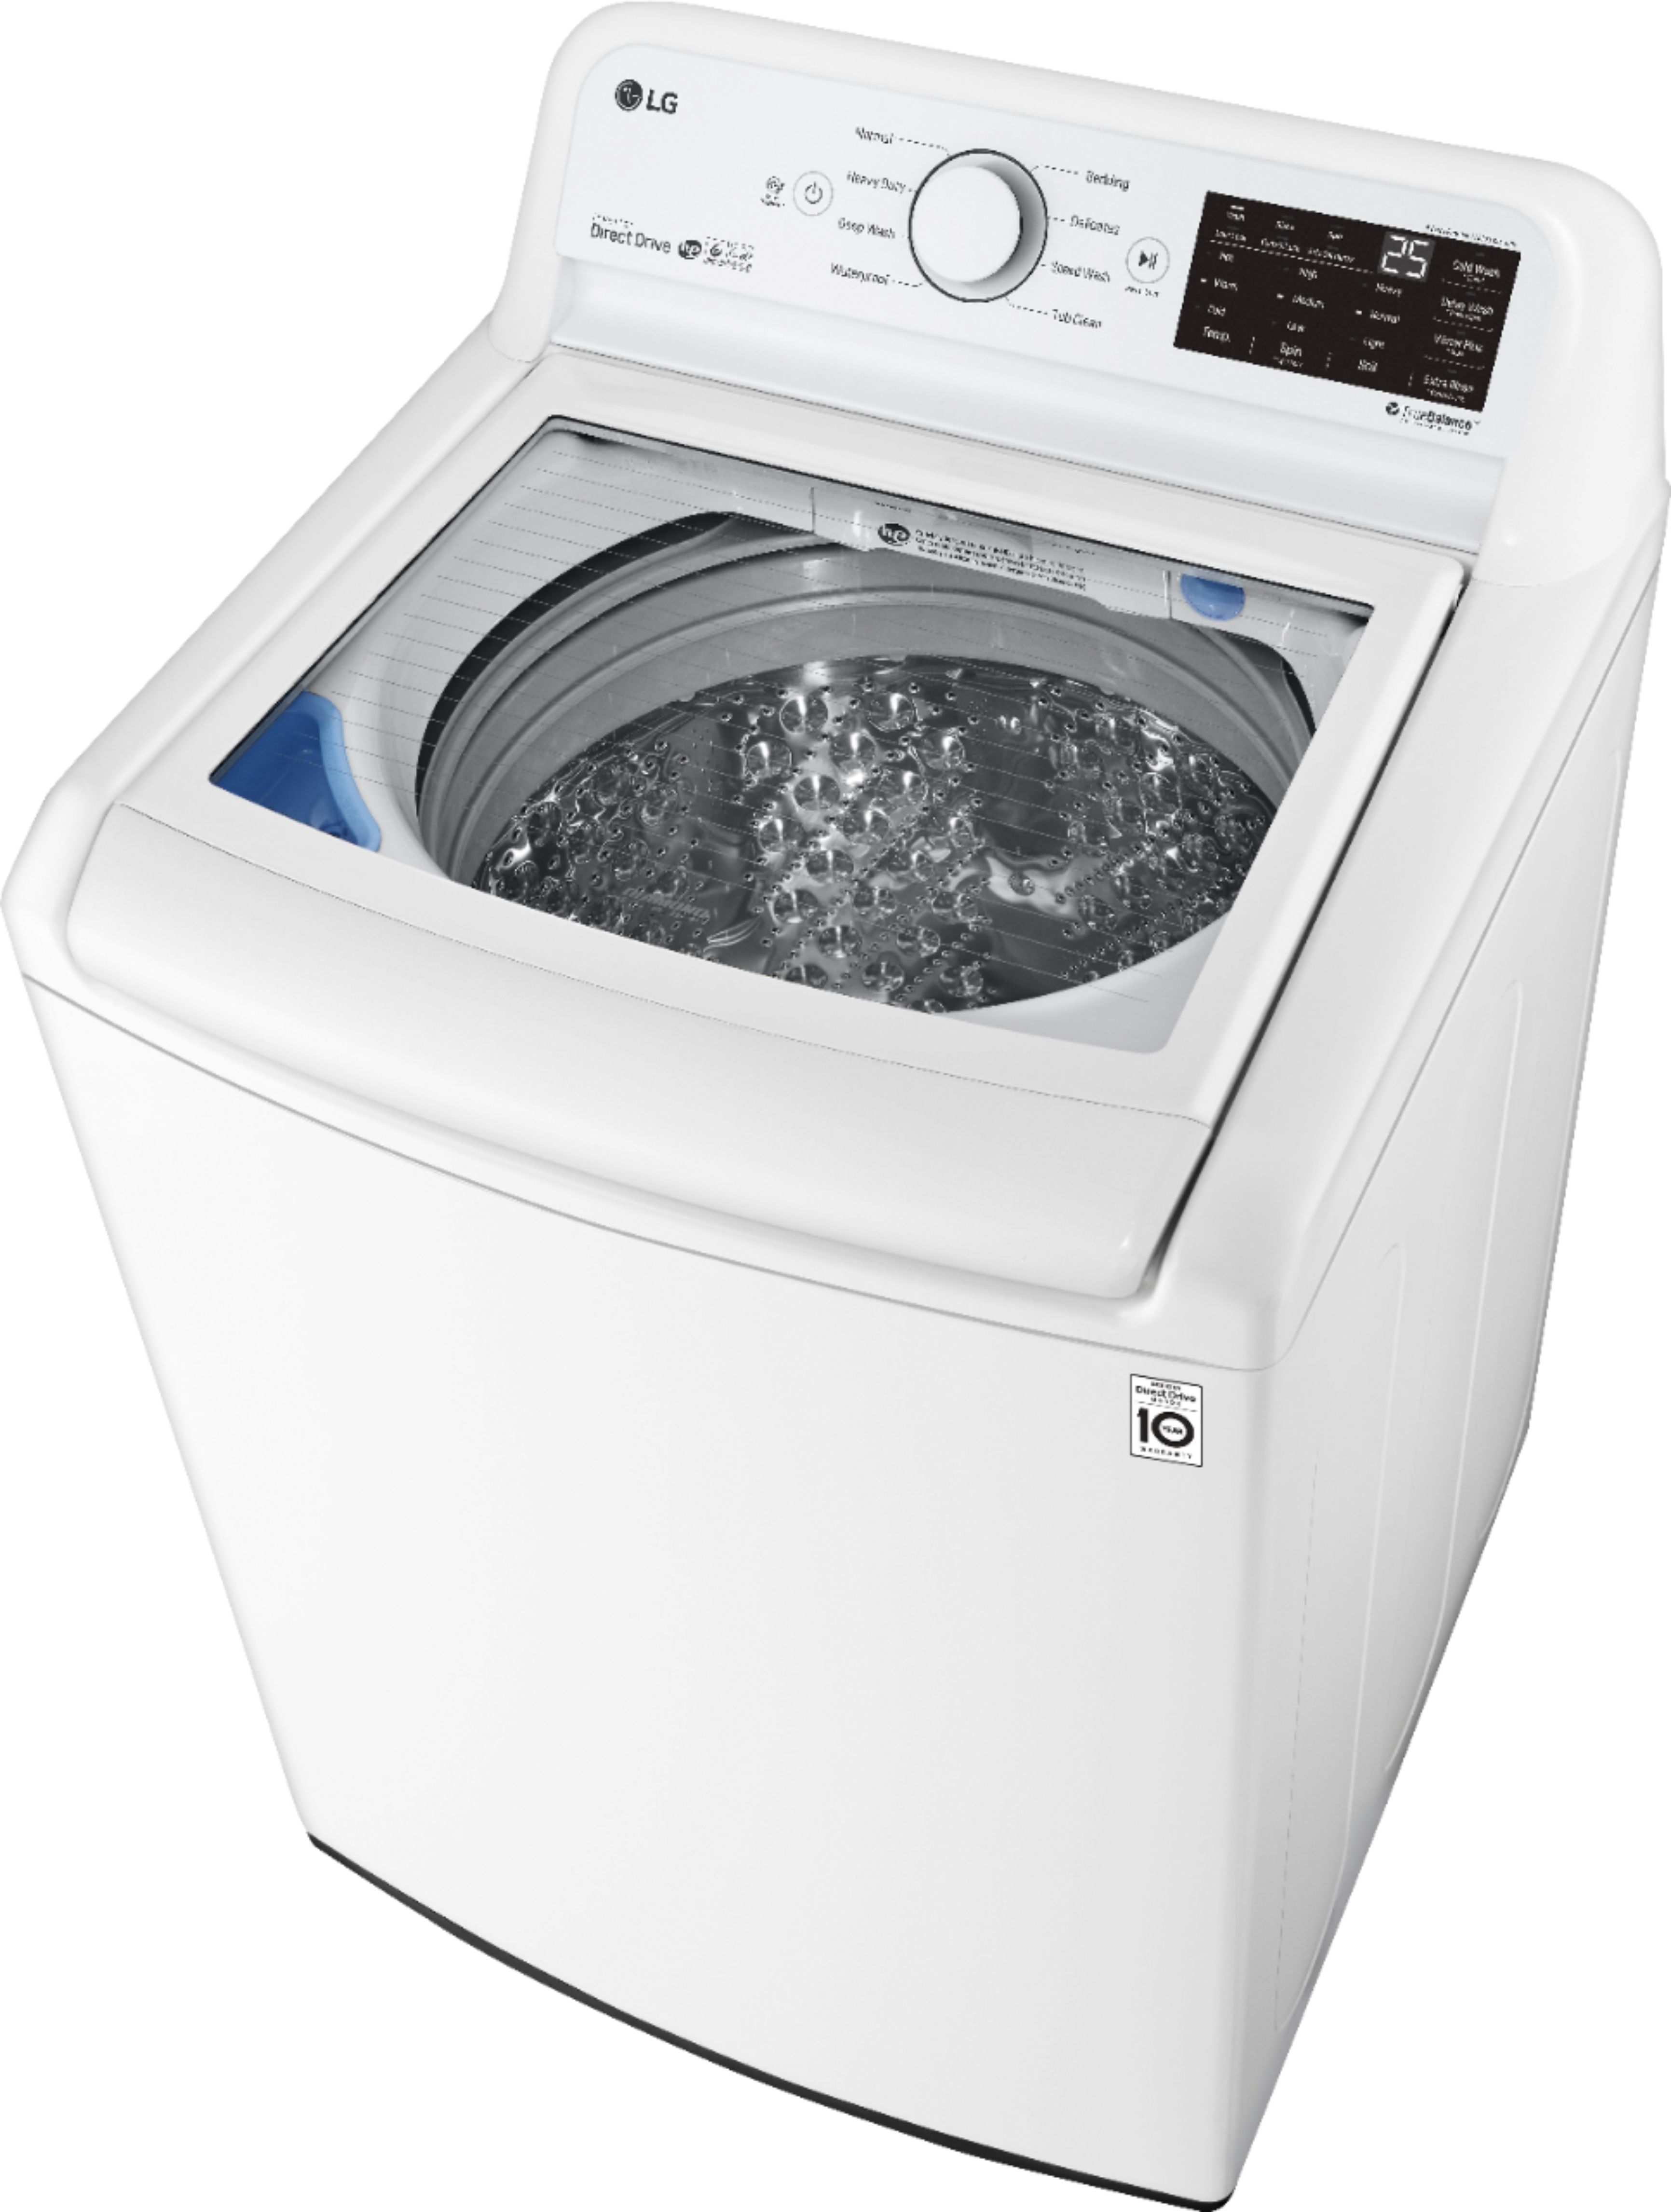 LG 4.5 Cu. Ft. 8Cycle HighEfficiency Top Load Washer with 6Motion